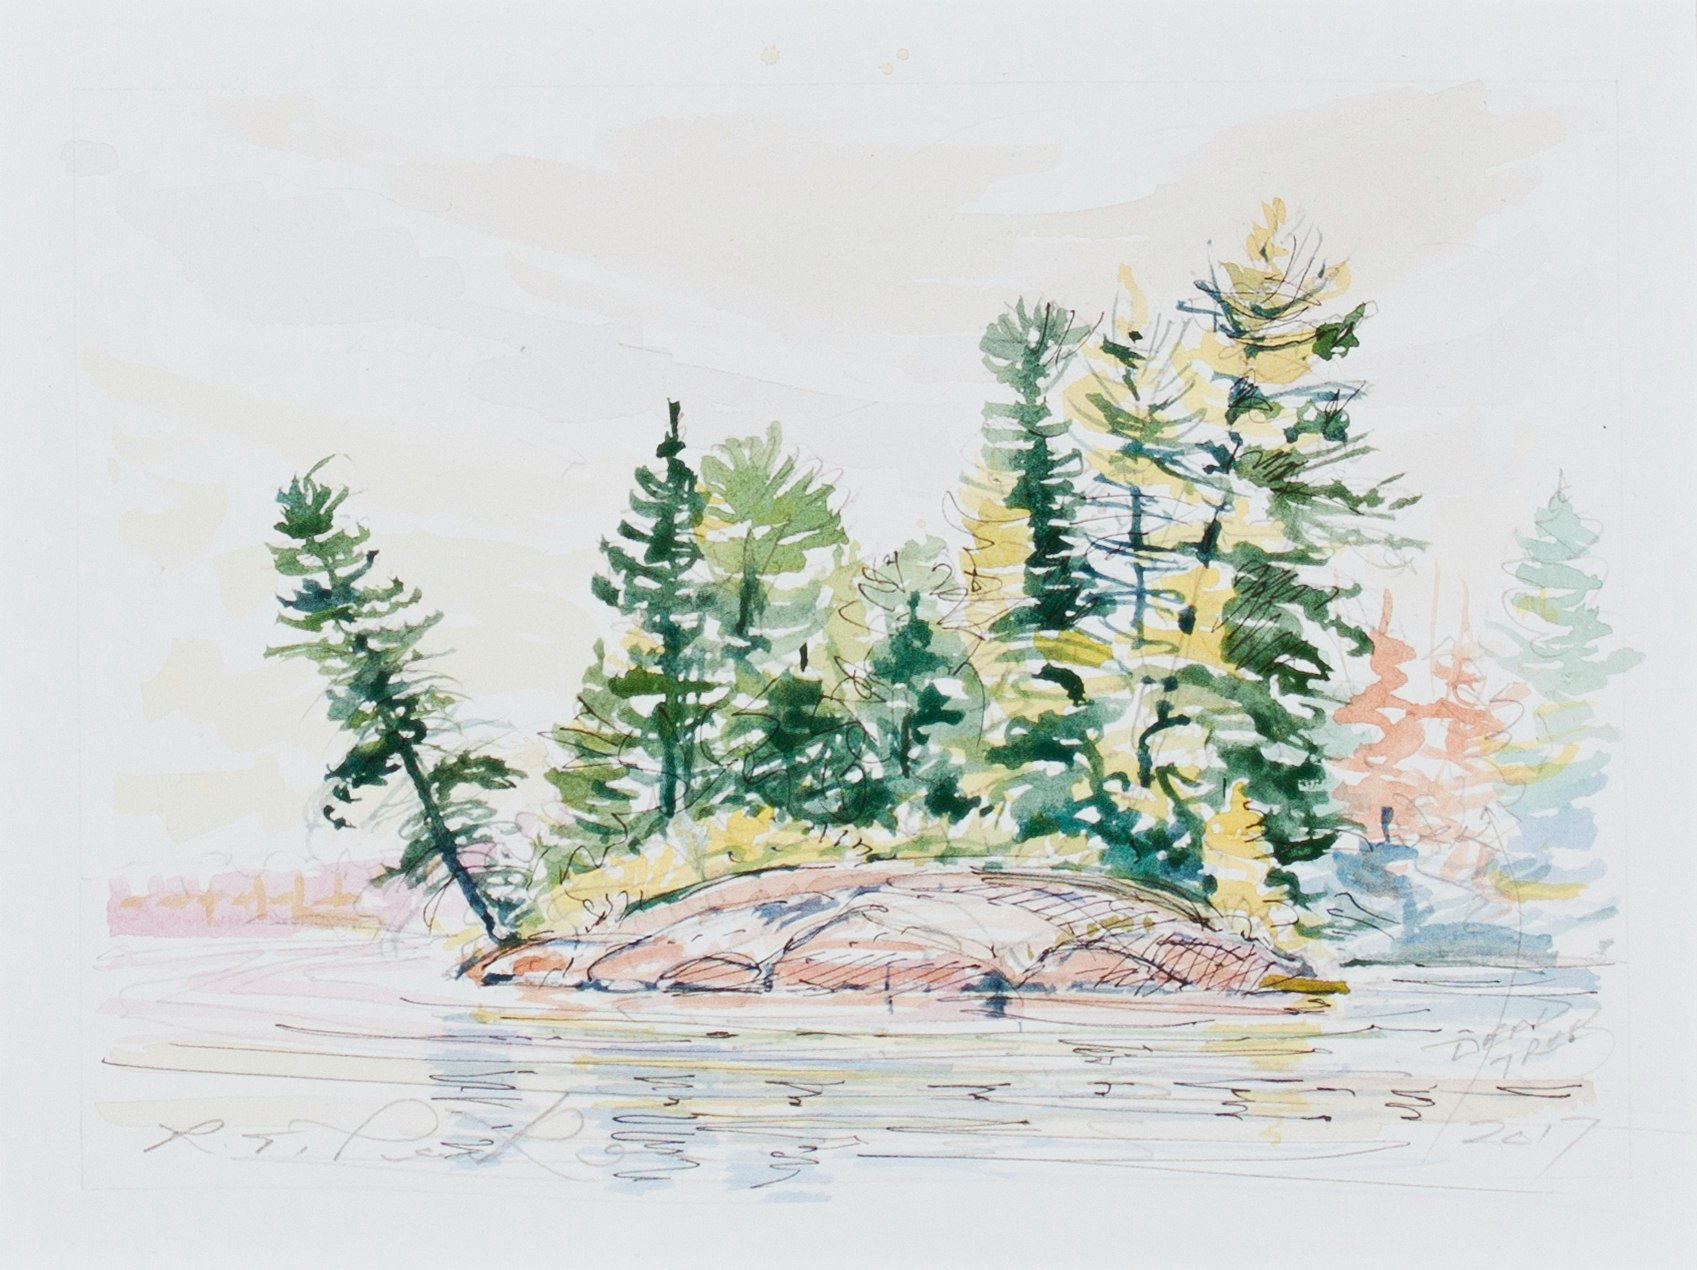 Leaning White Pine Study-North of French Portage